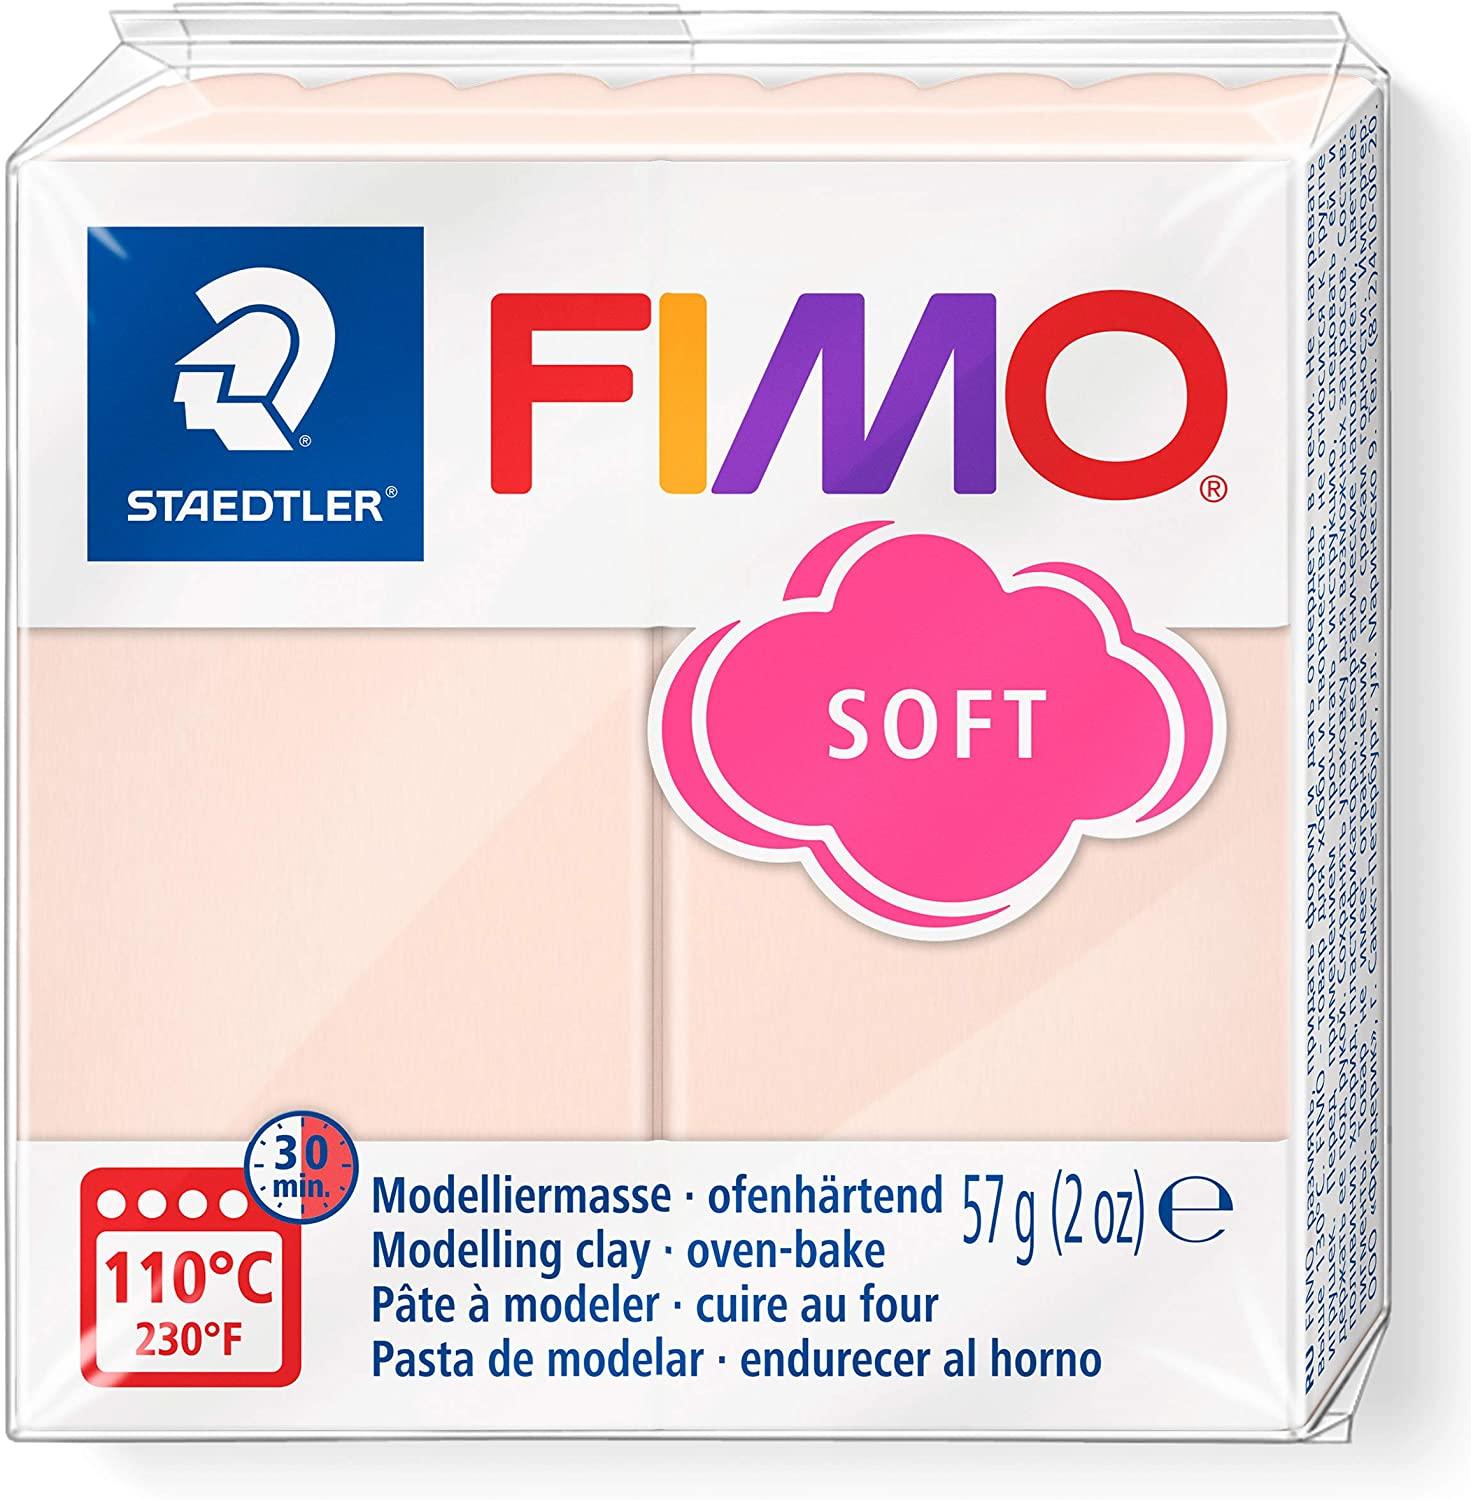 Light pink soft FIMO modelling clay in clear pack.